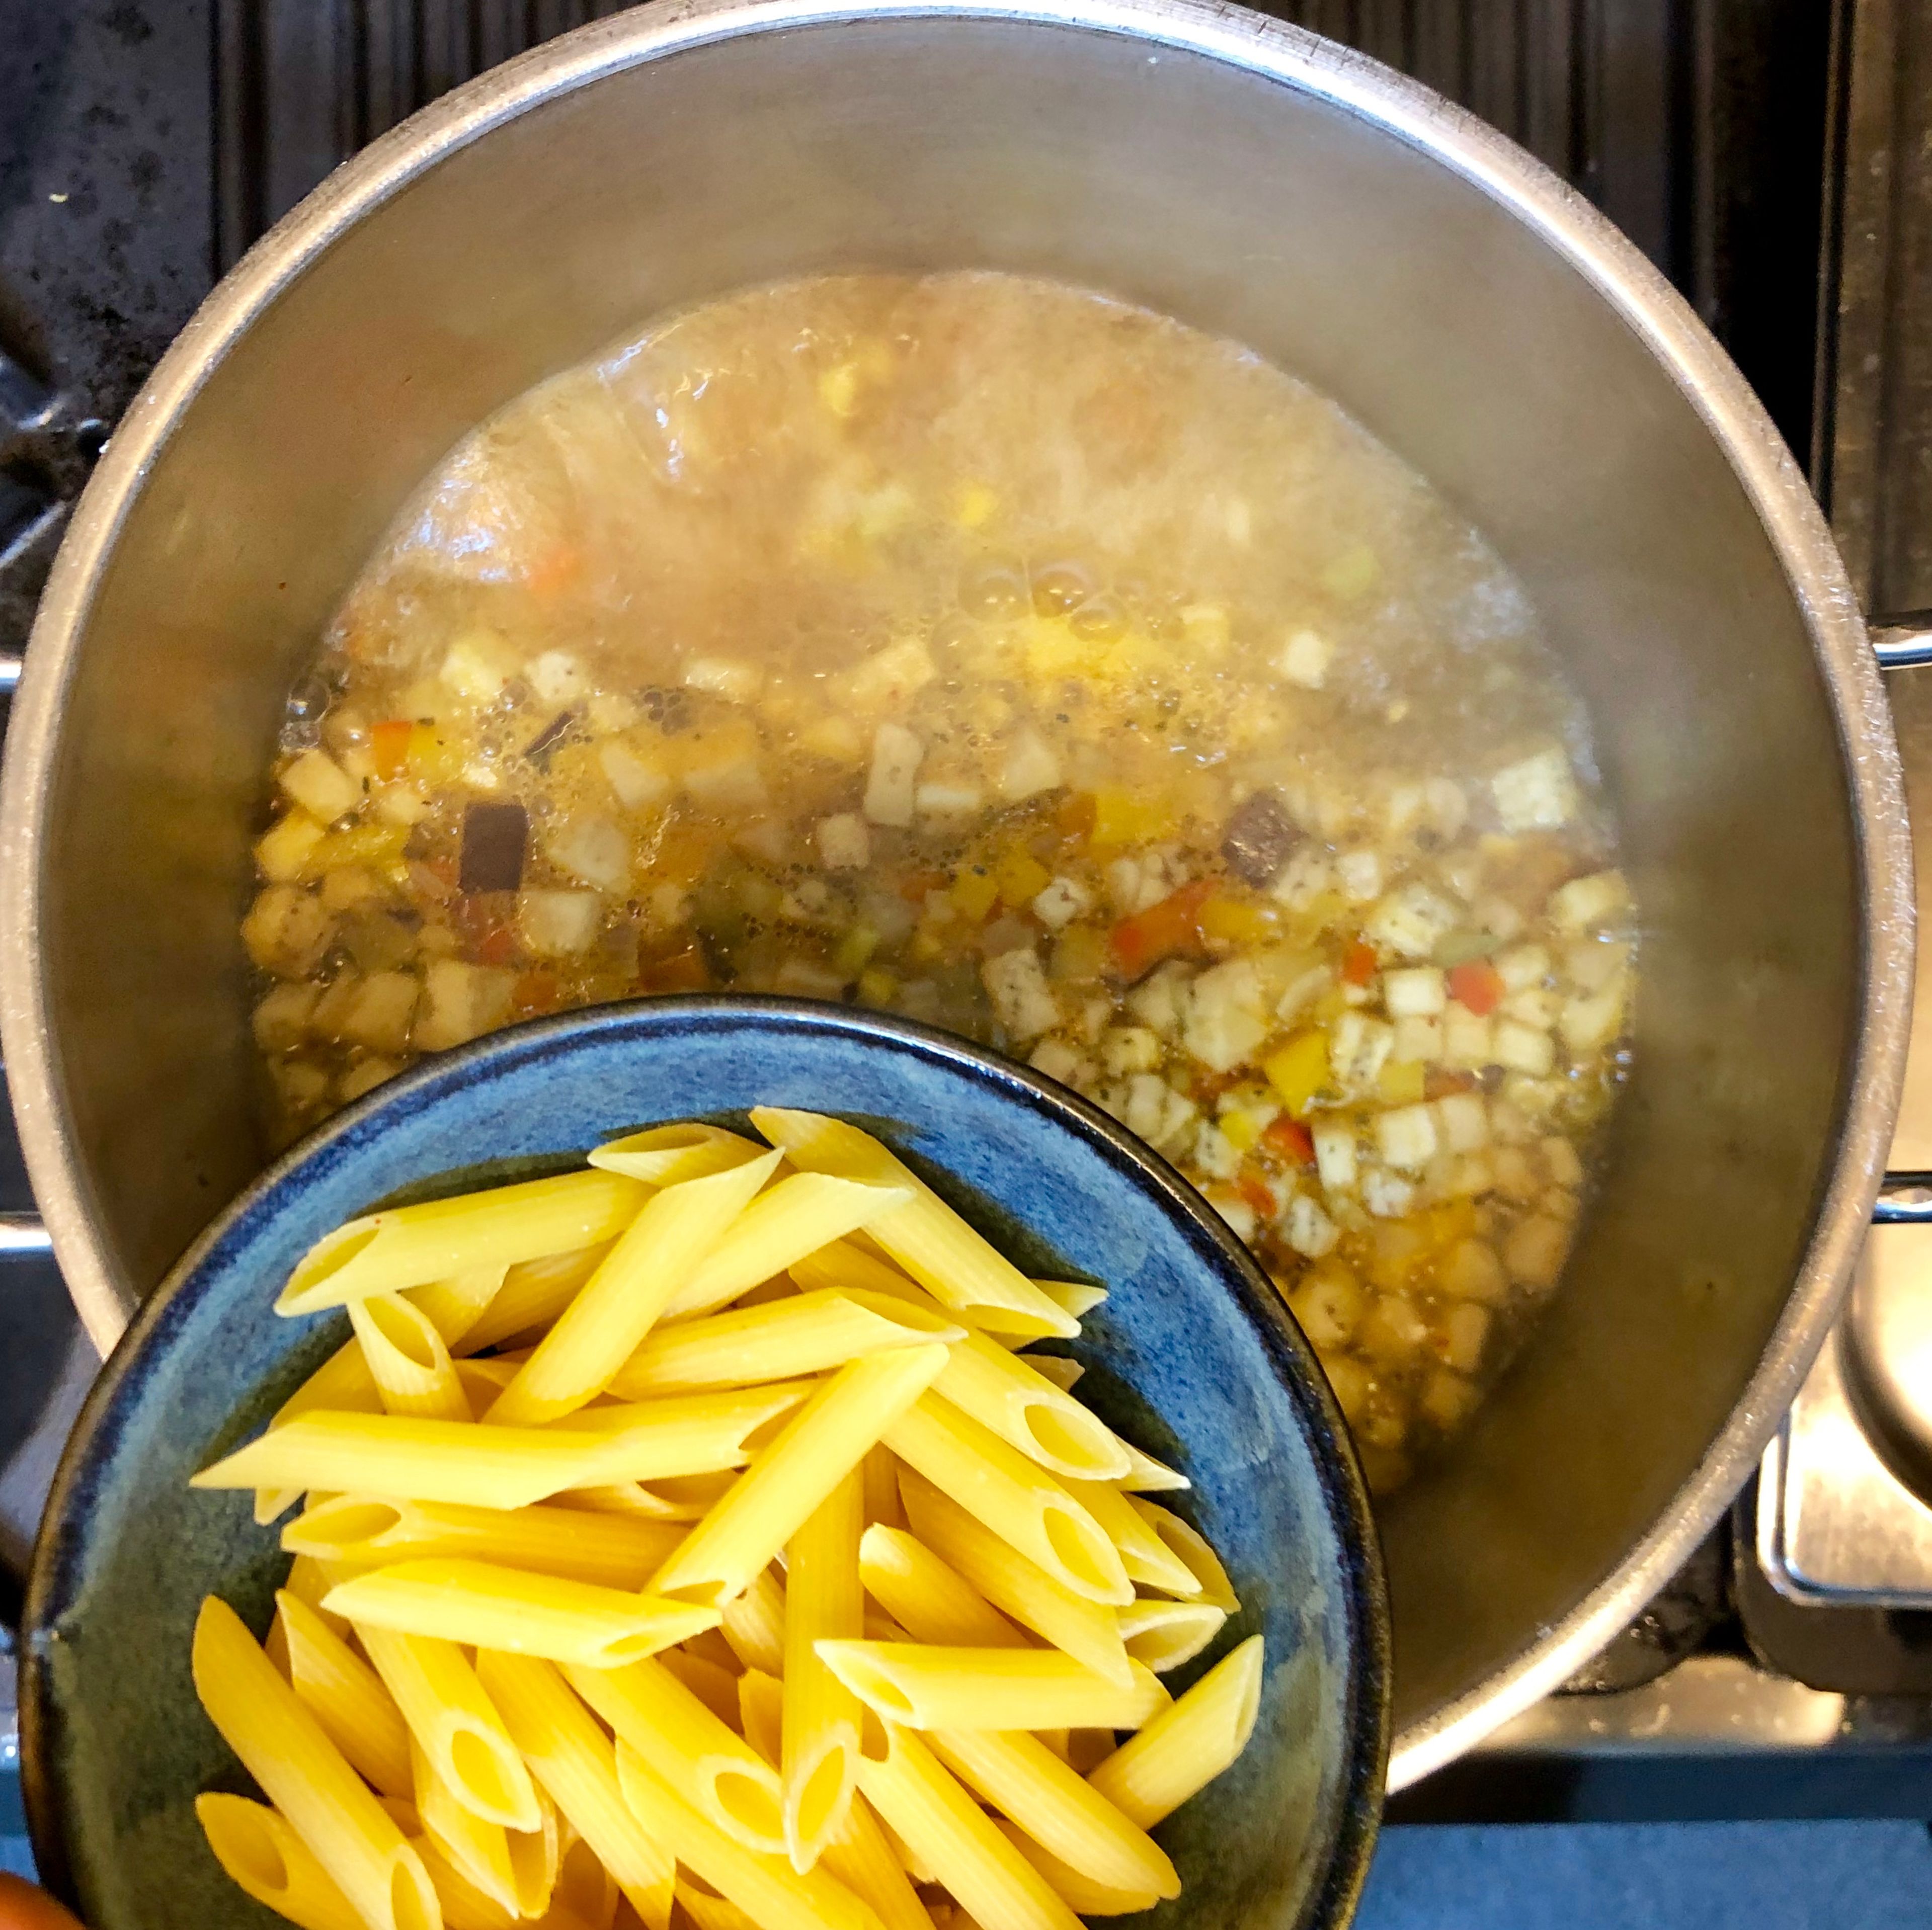 Add the penne and continue cooking for 7-9 minutes.